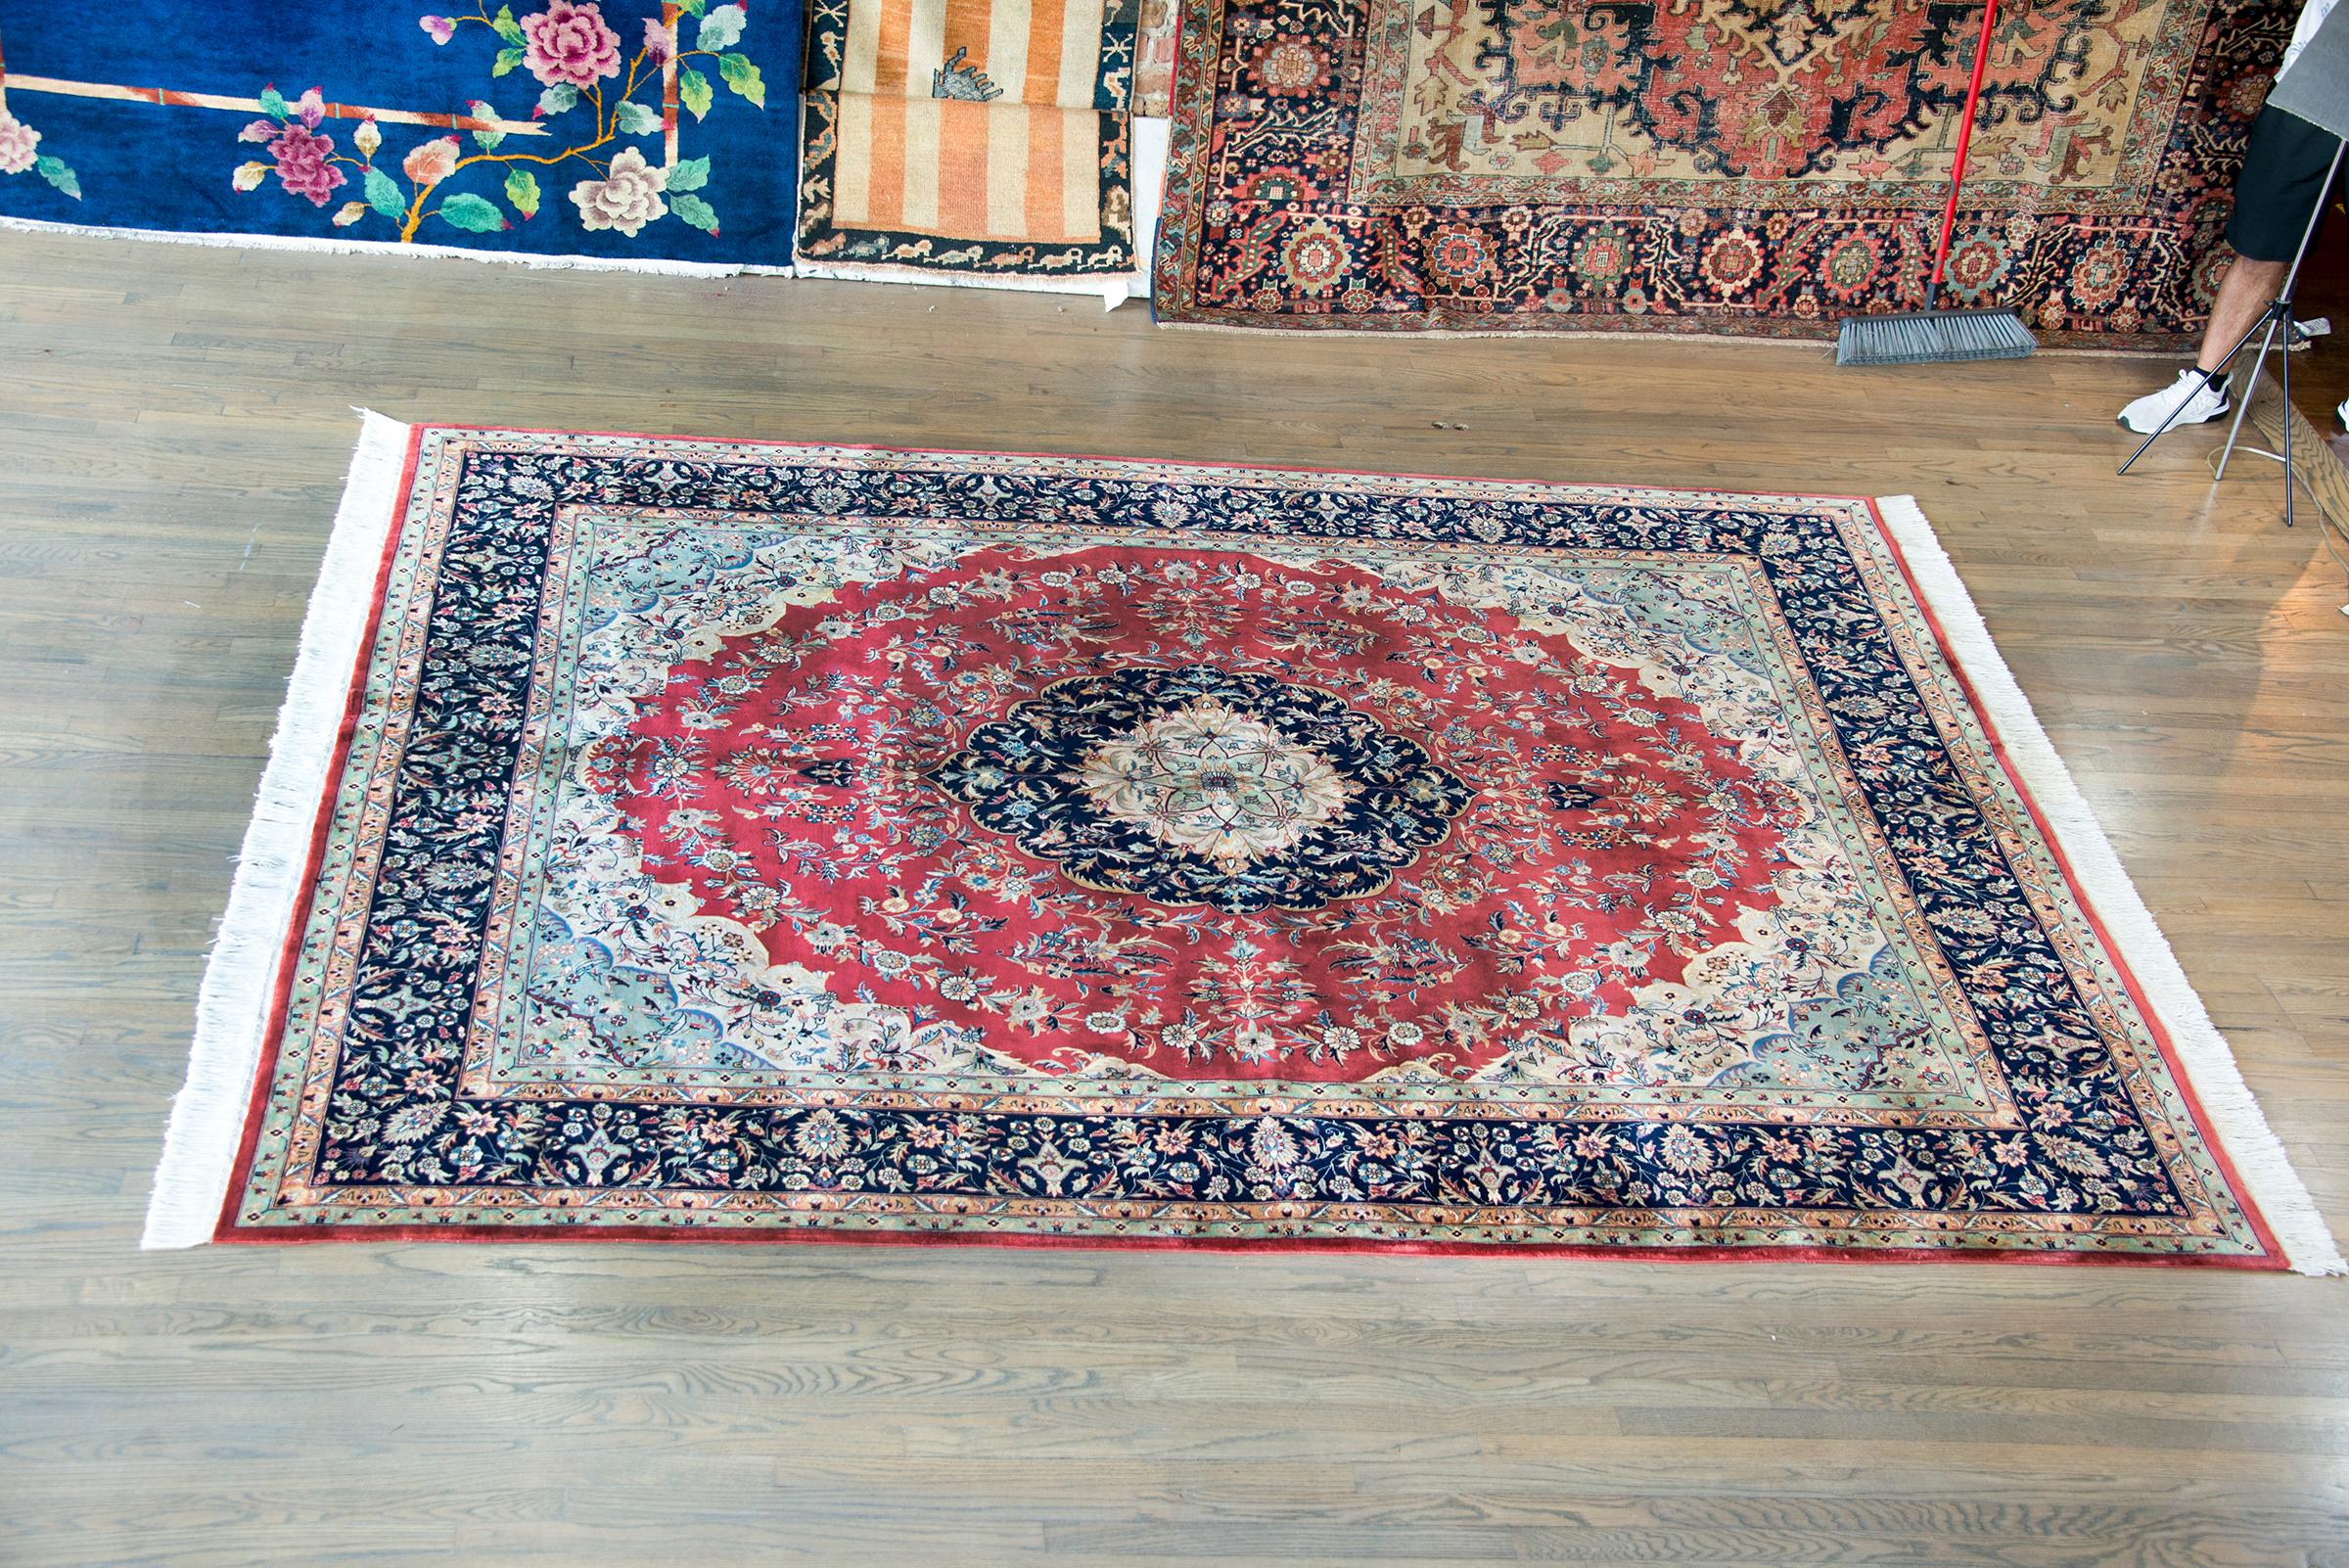 A wonderful late 20th century Indian Tabriz-style rug with a large central complex medallion woven with myriad stylized flowers and leaves, and woven in crimson, indigo, cream, gold, and green.  The border is complex with multiple wide and thin